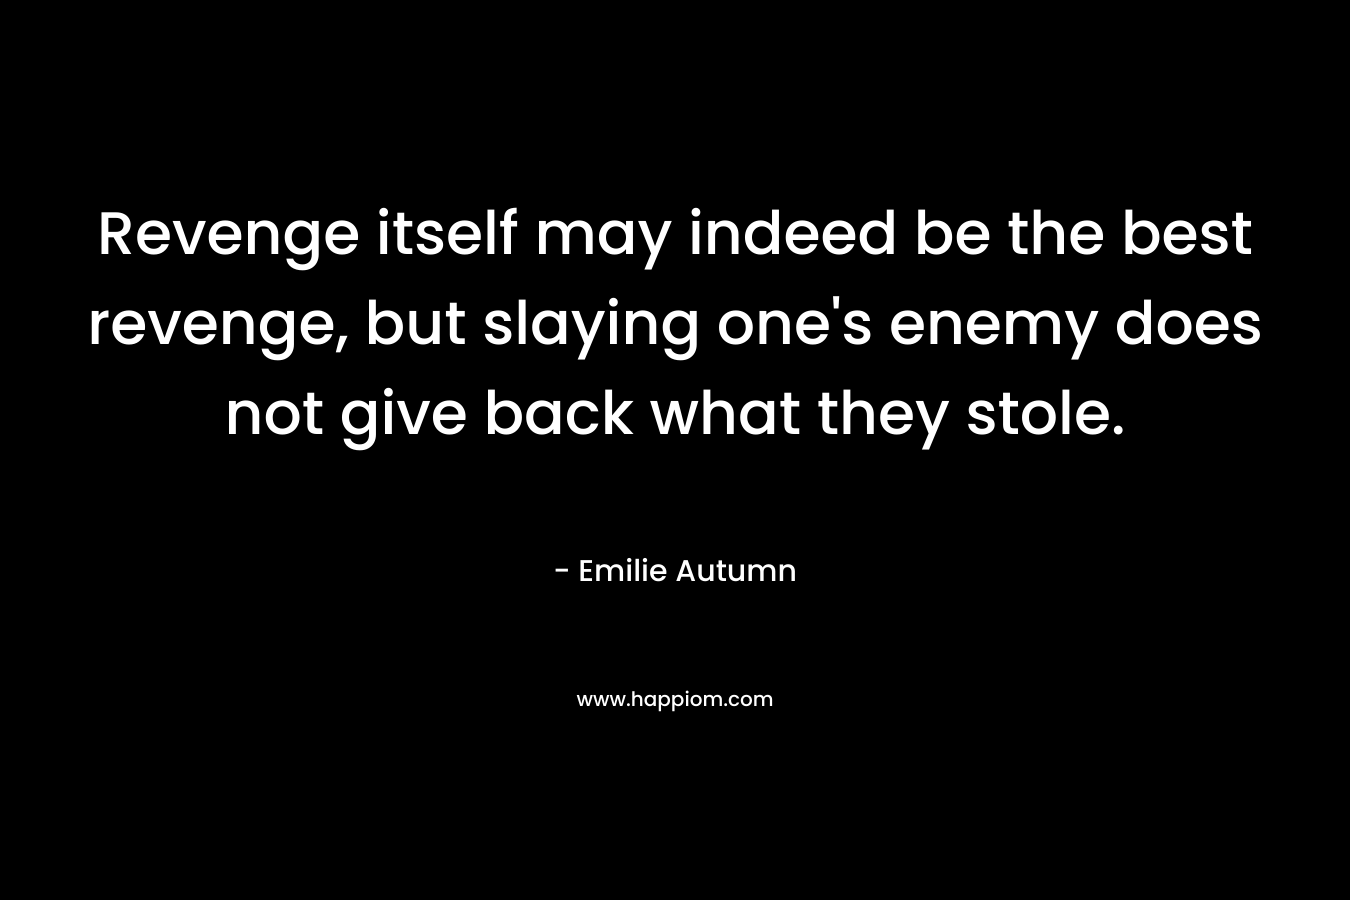 Revenge itself may indeed be the best revenge, but slaying one’s enemy does not give back what they stole. – Emilie Autumn